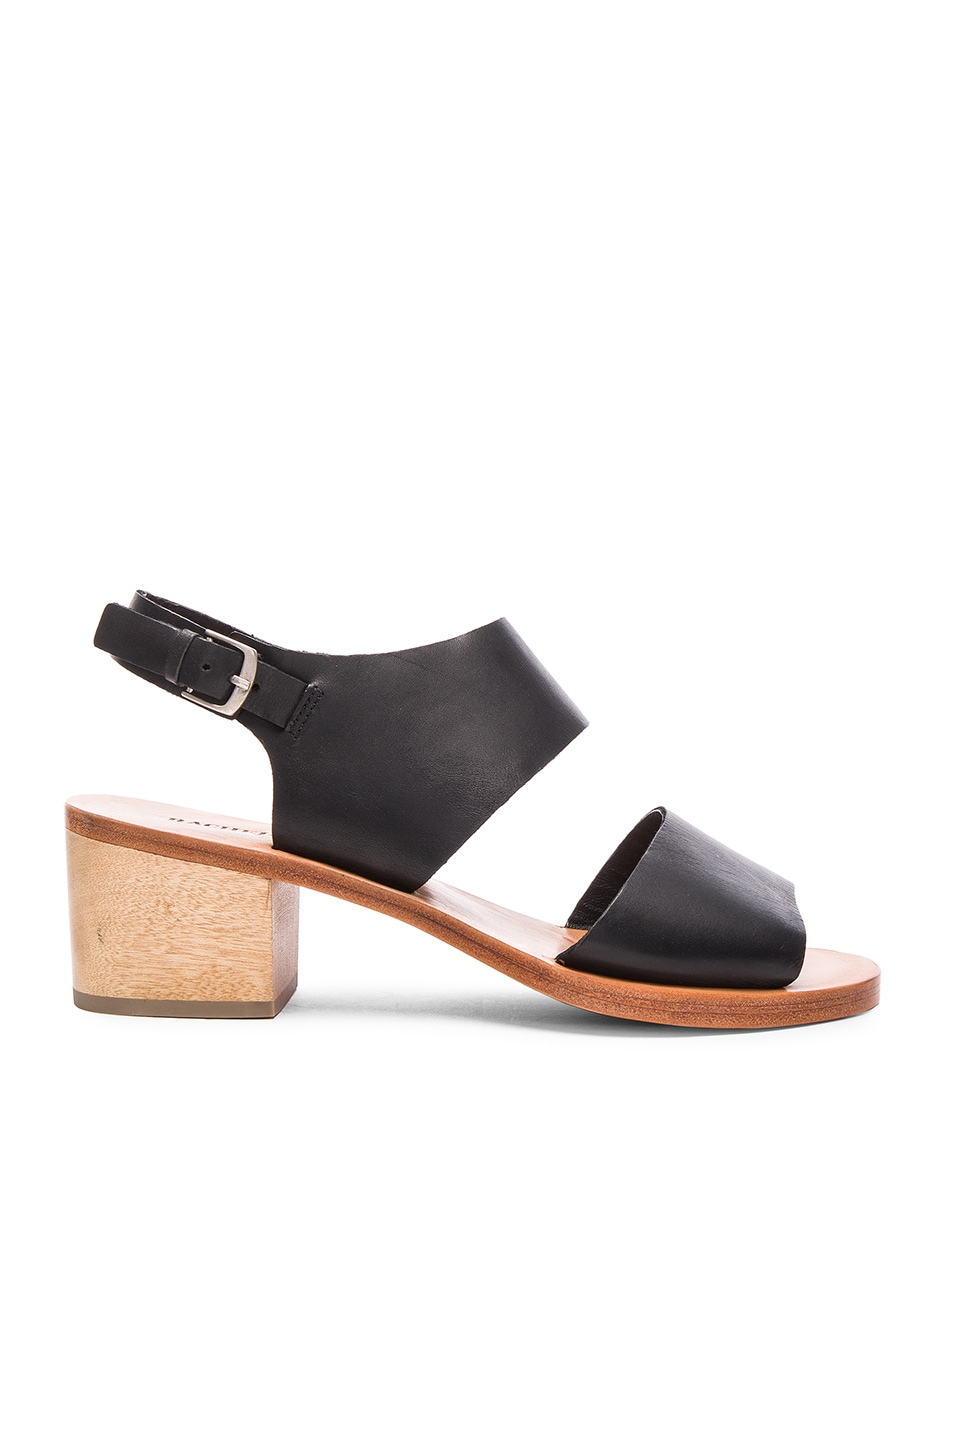 Image 1 of Rachel Comey Leather Tulip Sandals in Polished Black